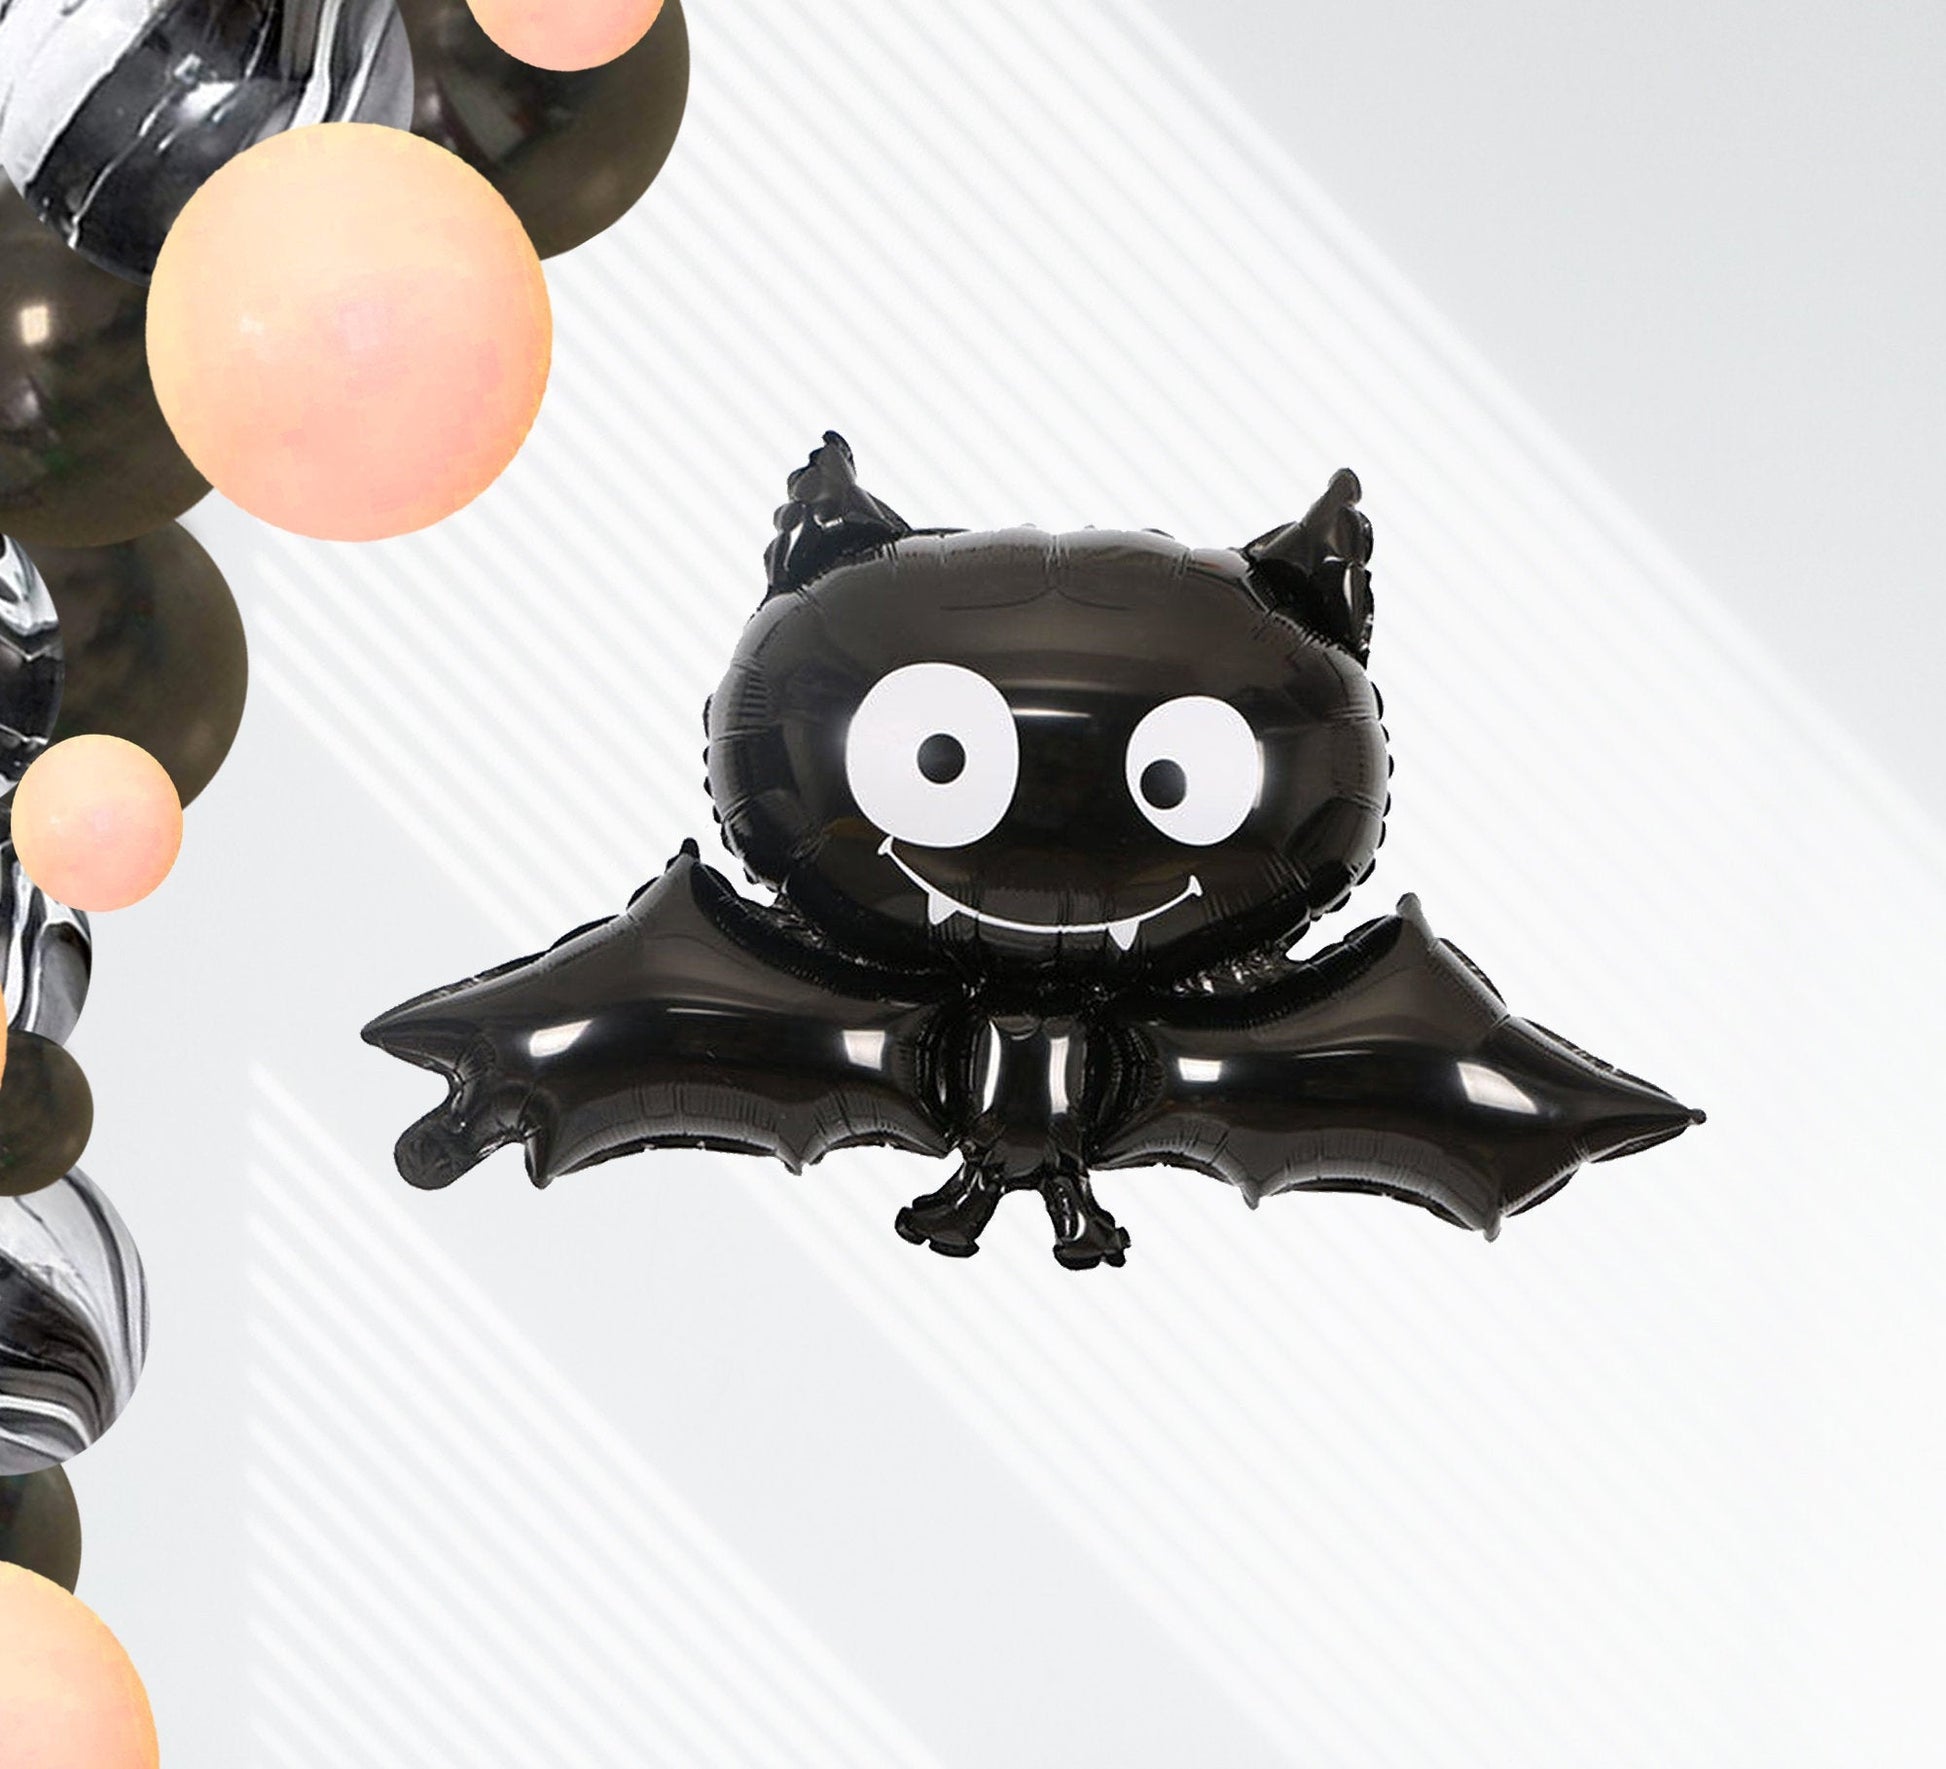 Sweet and Spooky. Pink Cute Halloween. Holographic. Bats. 